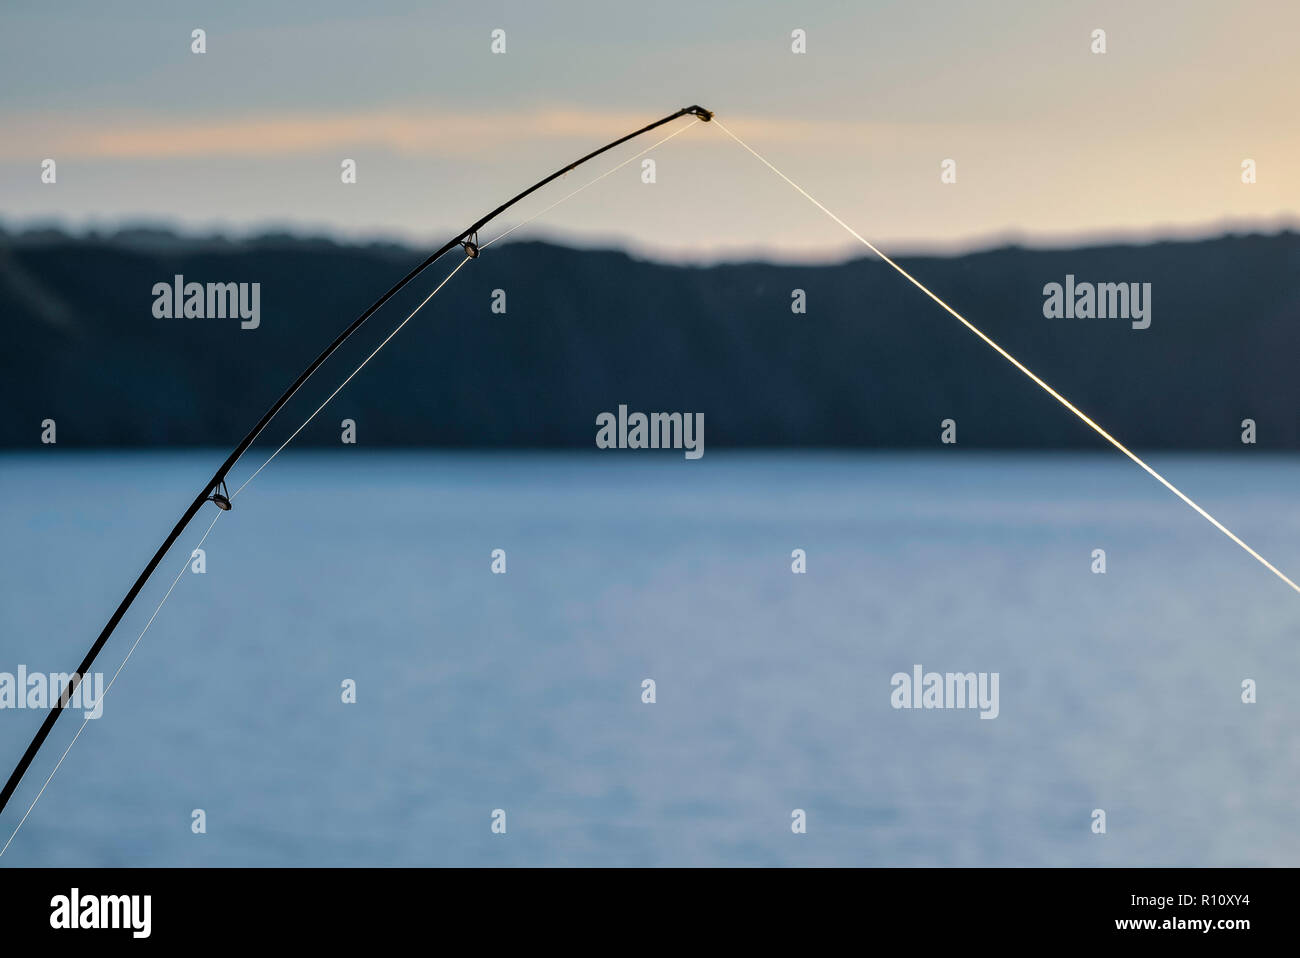 TIP OF FISHING ROD WITH TIGHT LINE. Stock Photo